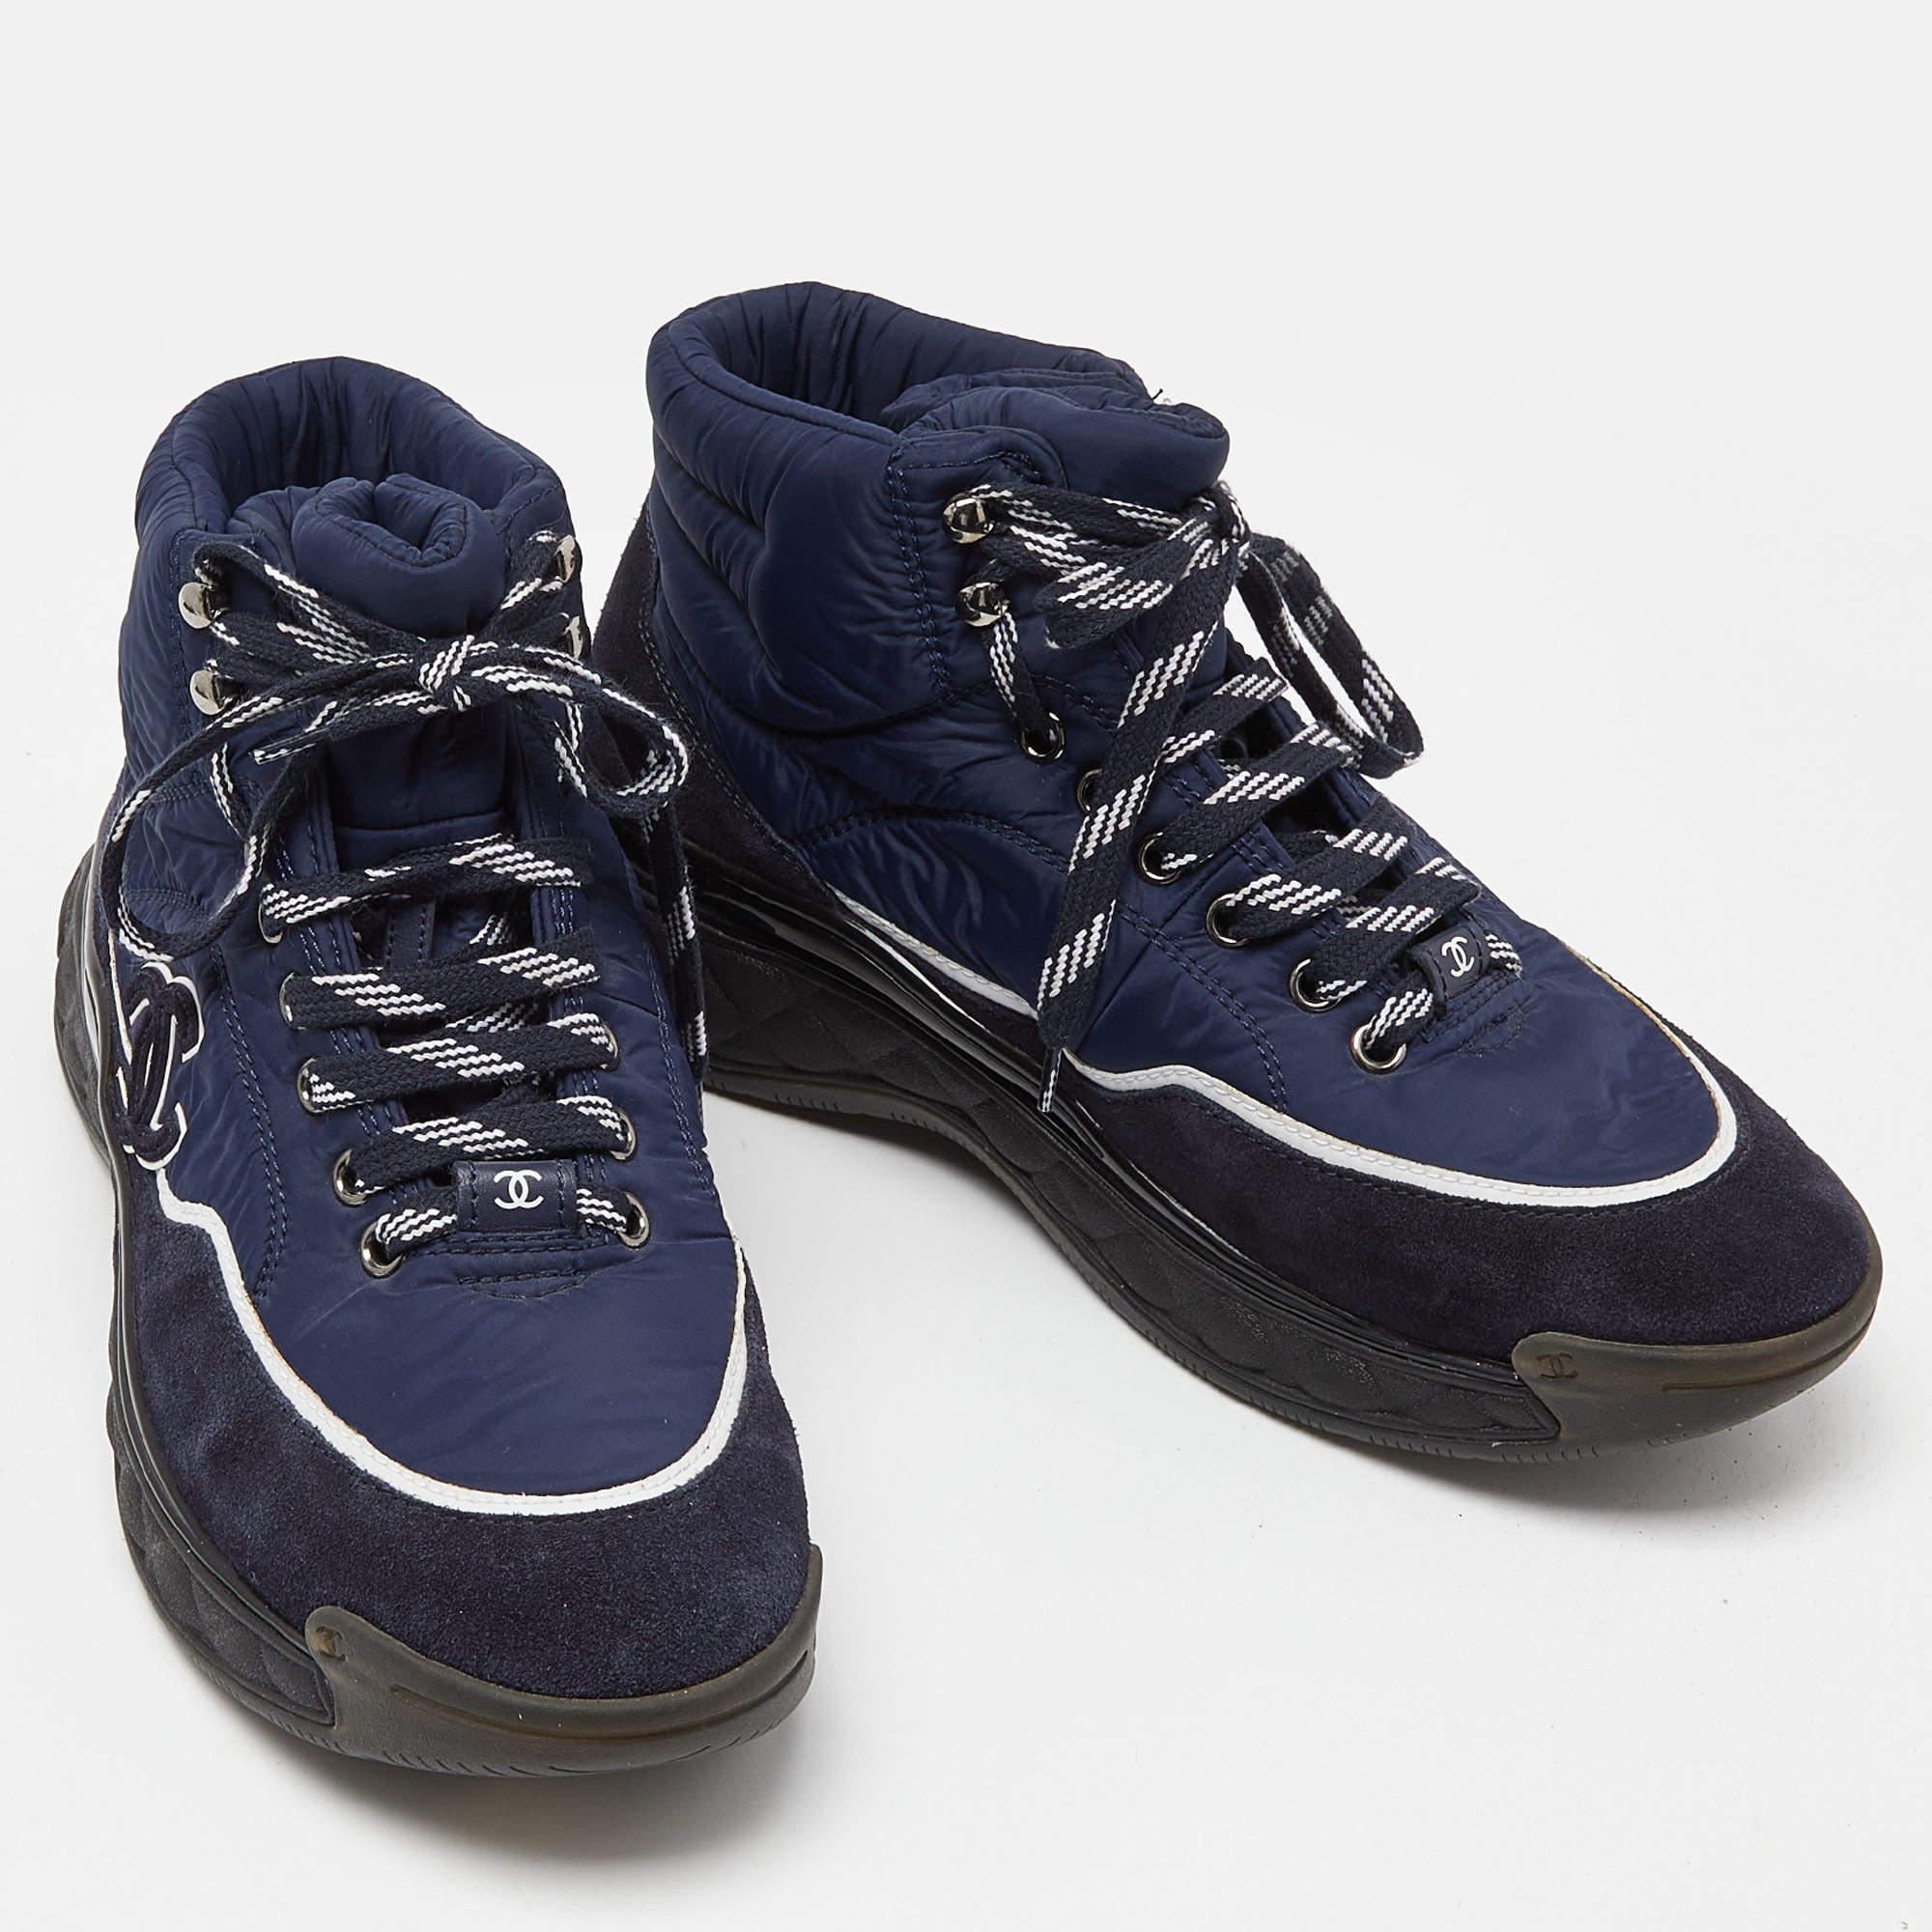 Chanel Navy Blue Nylon and Suede High Top Lace Up Sneakers Size 40 In Good Condition For Sale In Dubai, Al Qouz 2